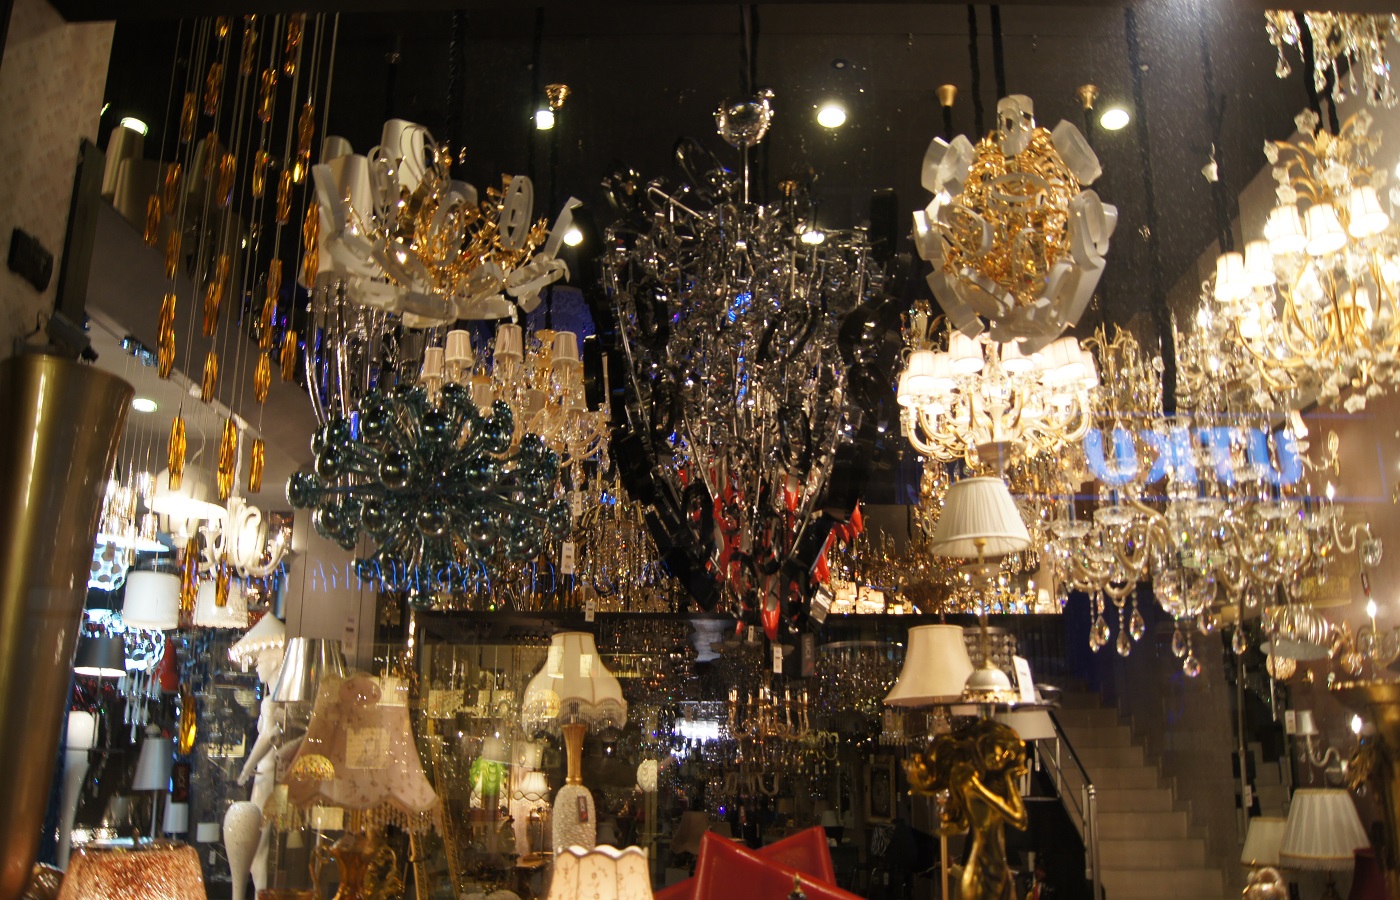 chandeliers on display